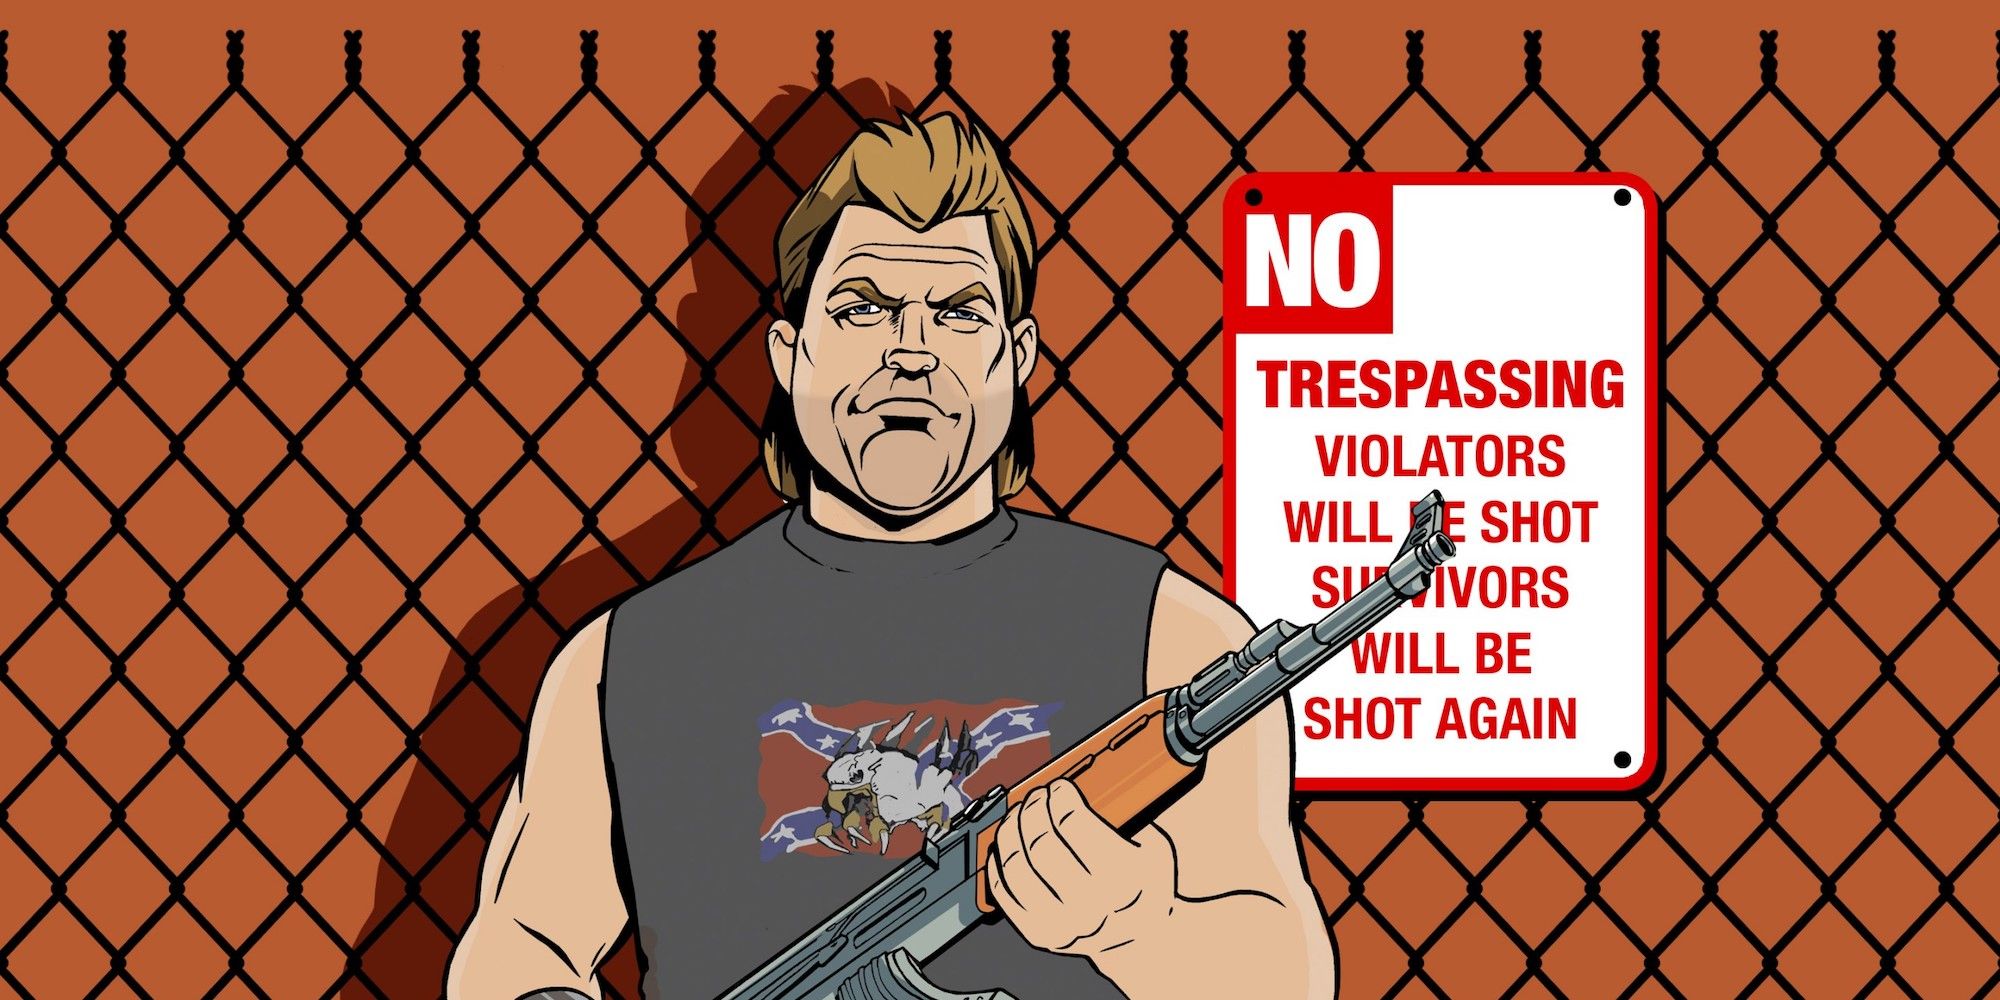 The art for Phil Cassidy from GTA Vice City, holding a gun and standing in front of a fence.